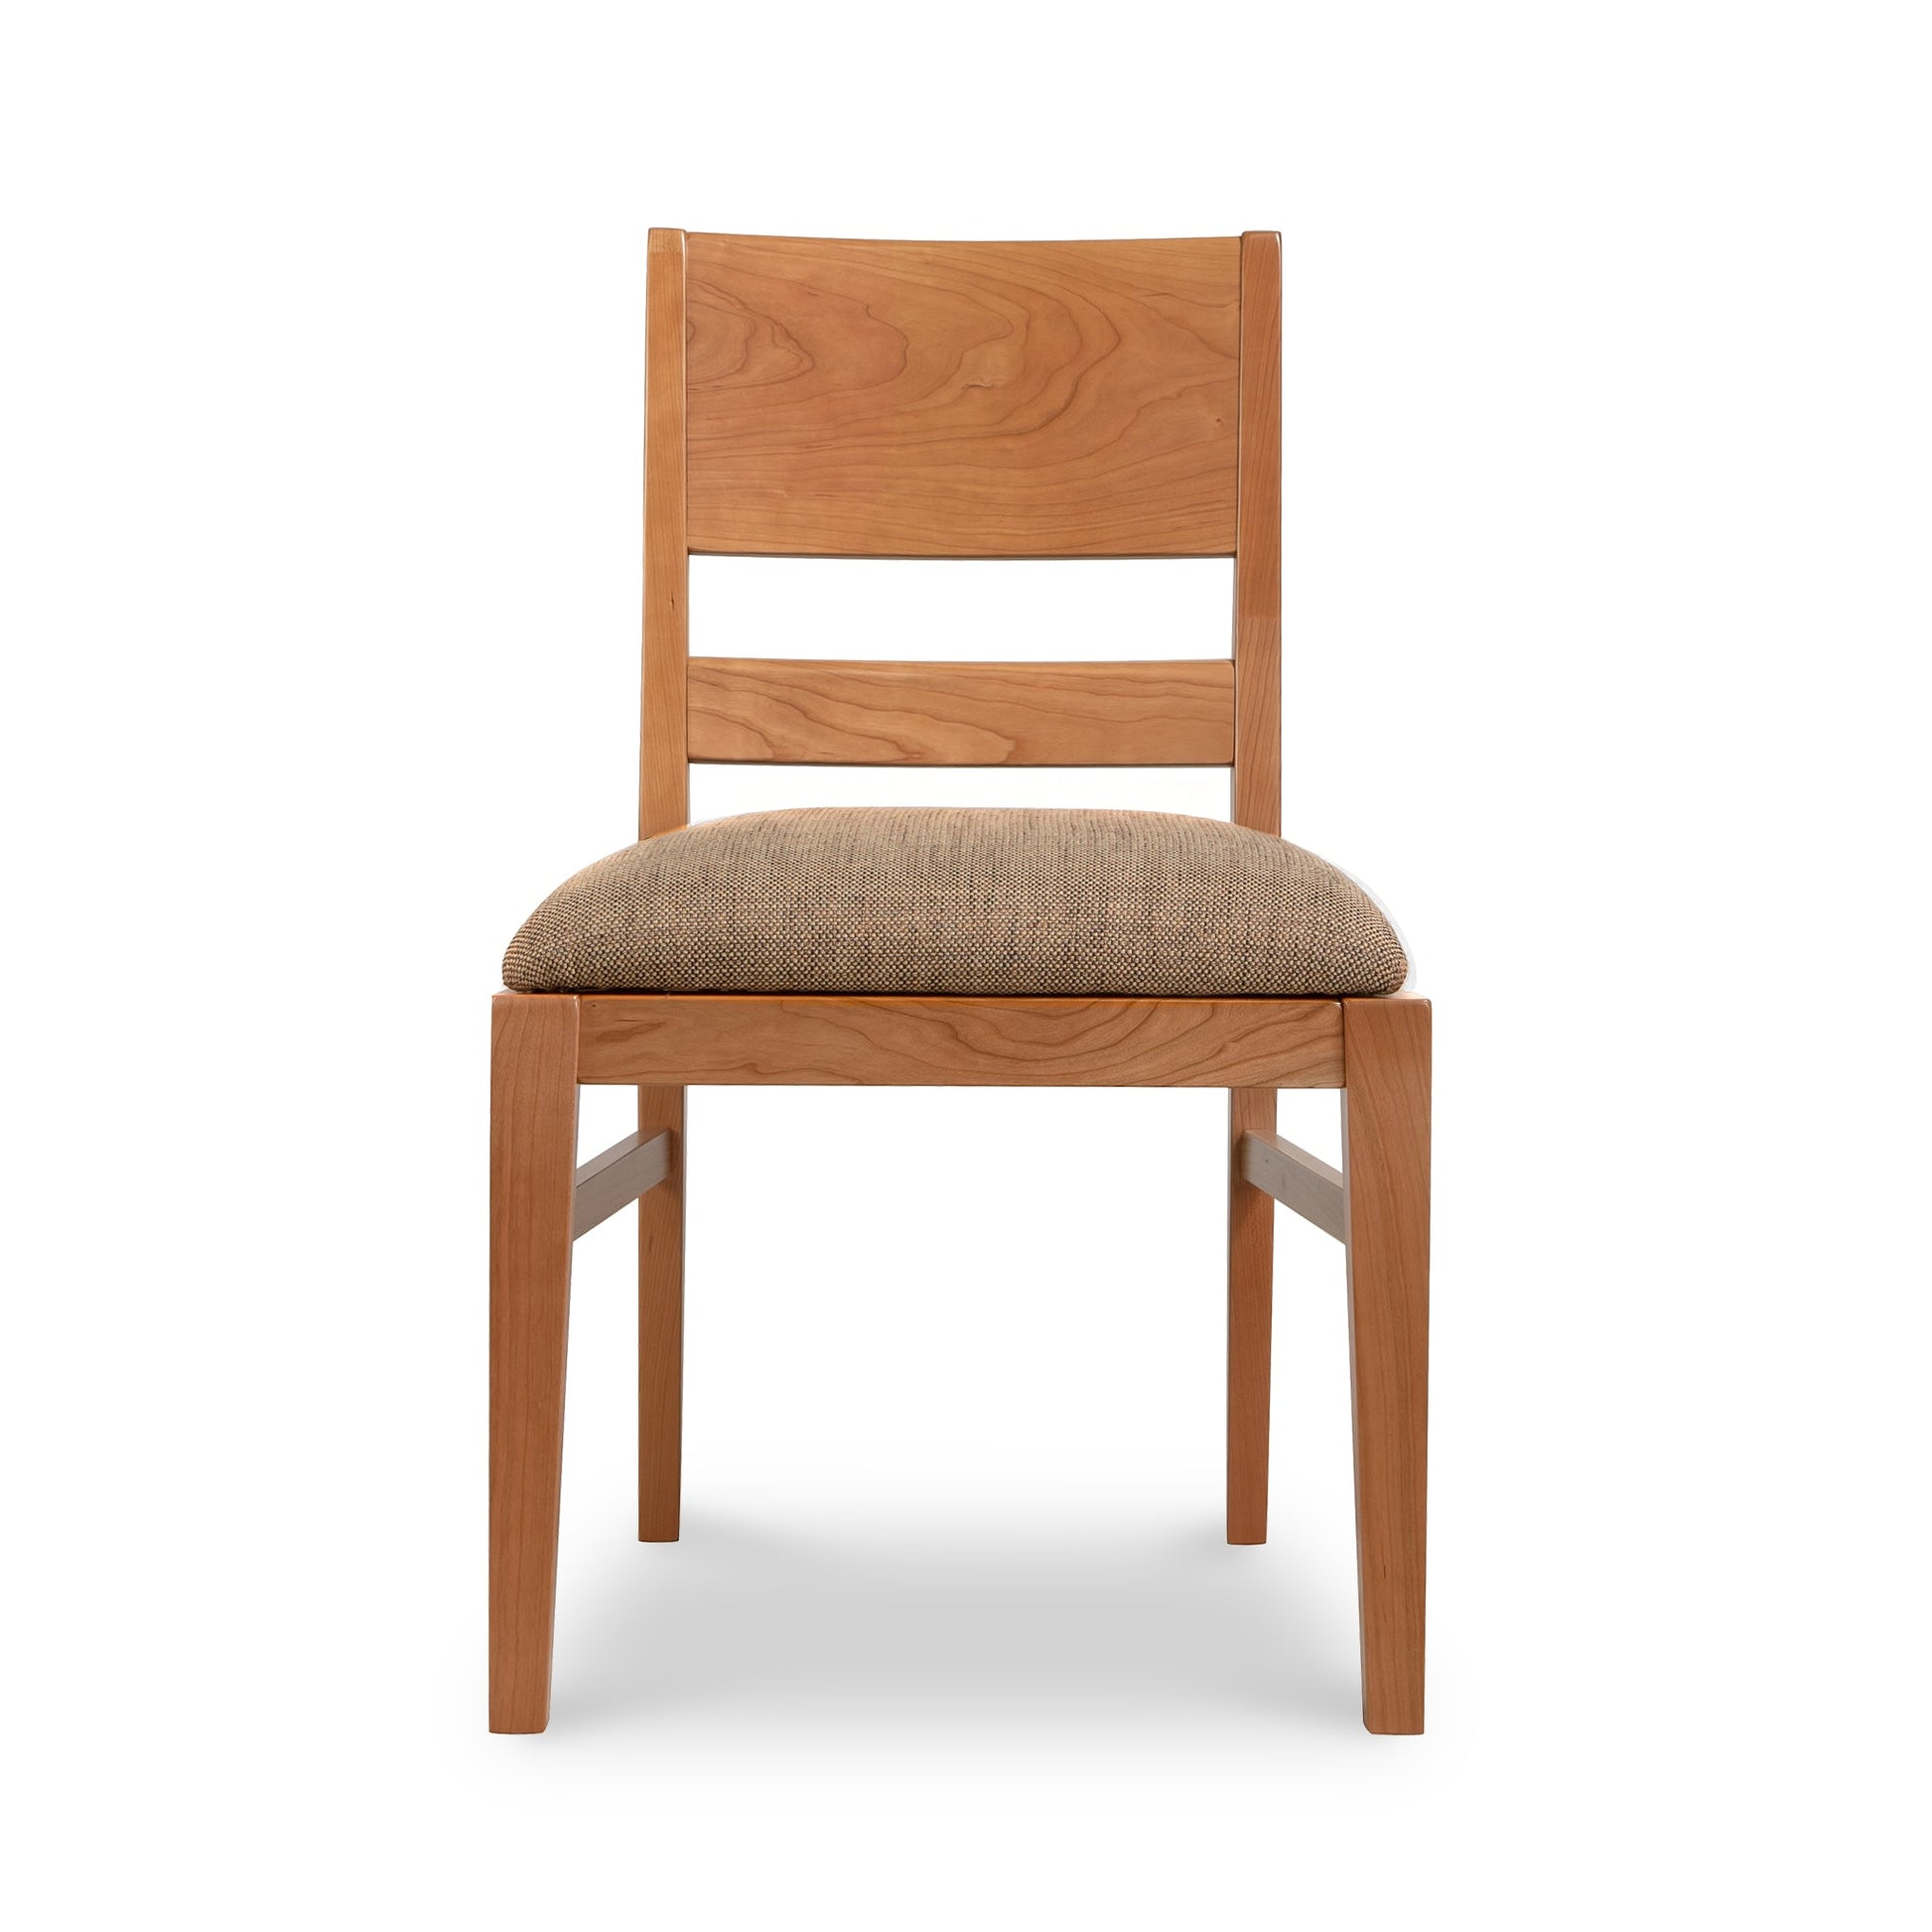 A wooden dining chair with a tan upholstered seat.